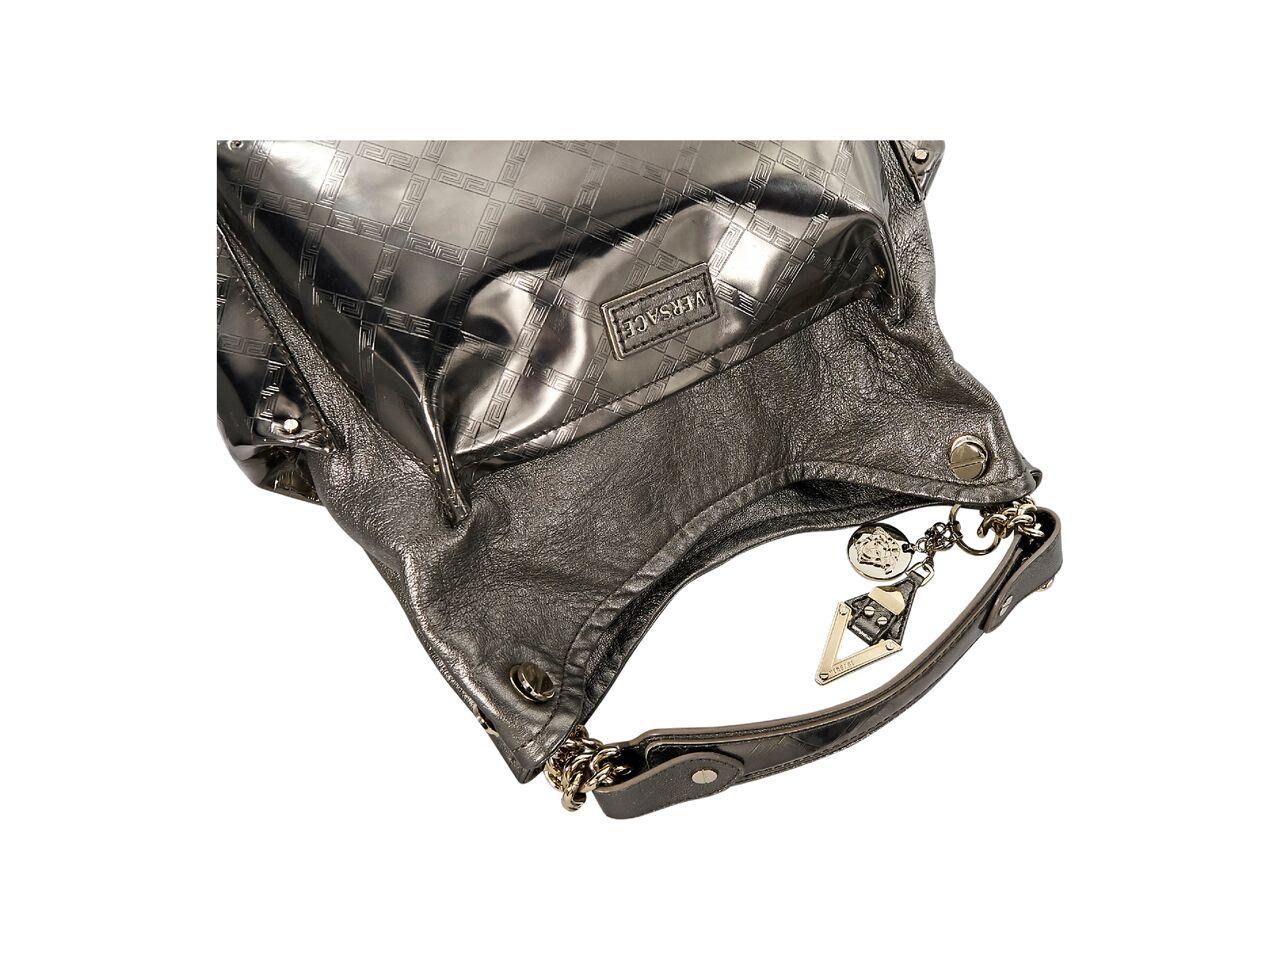 Product details:  Metallic copper leather hobo bag by Versace.  Single shoulder strap.  Open top.  Lined interior with inner zip and slide pockets.  Goldtone hardware.  13